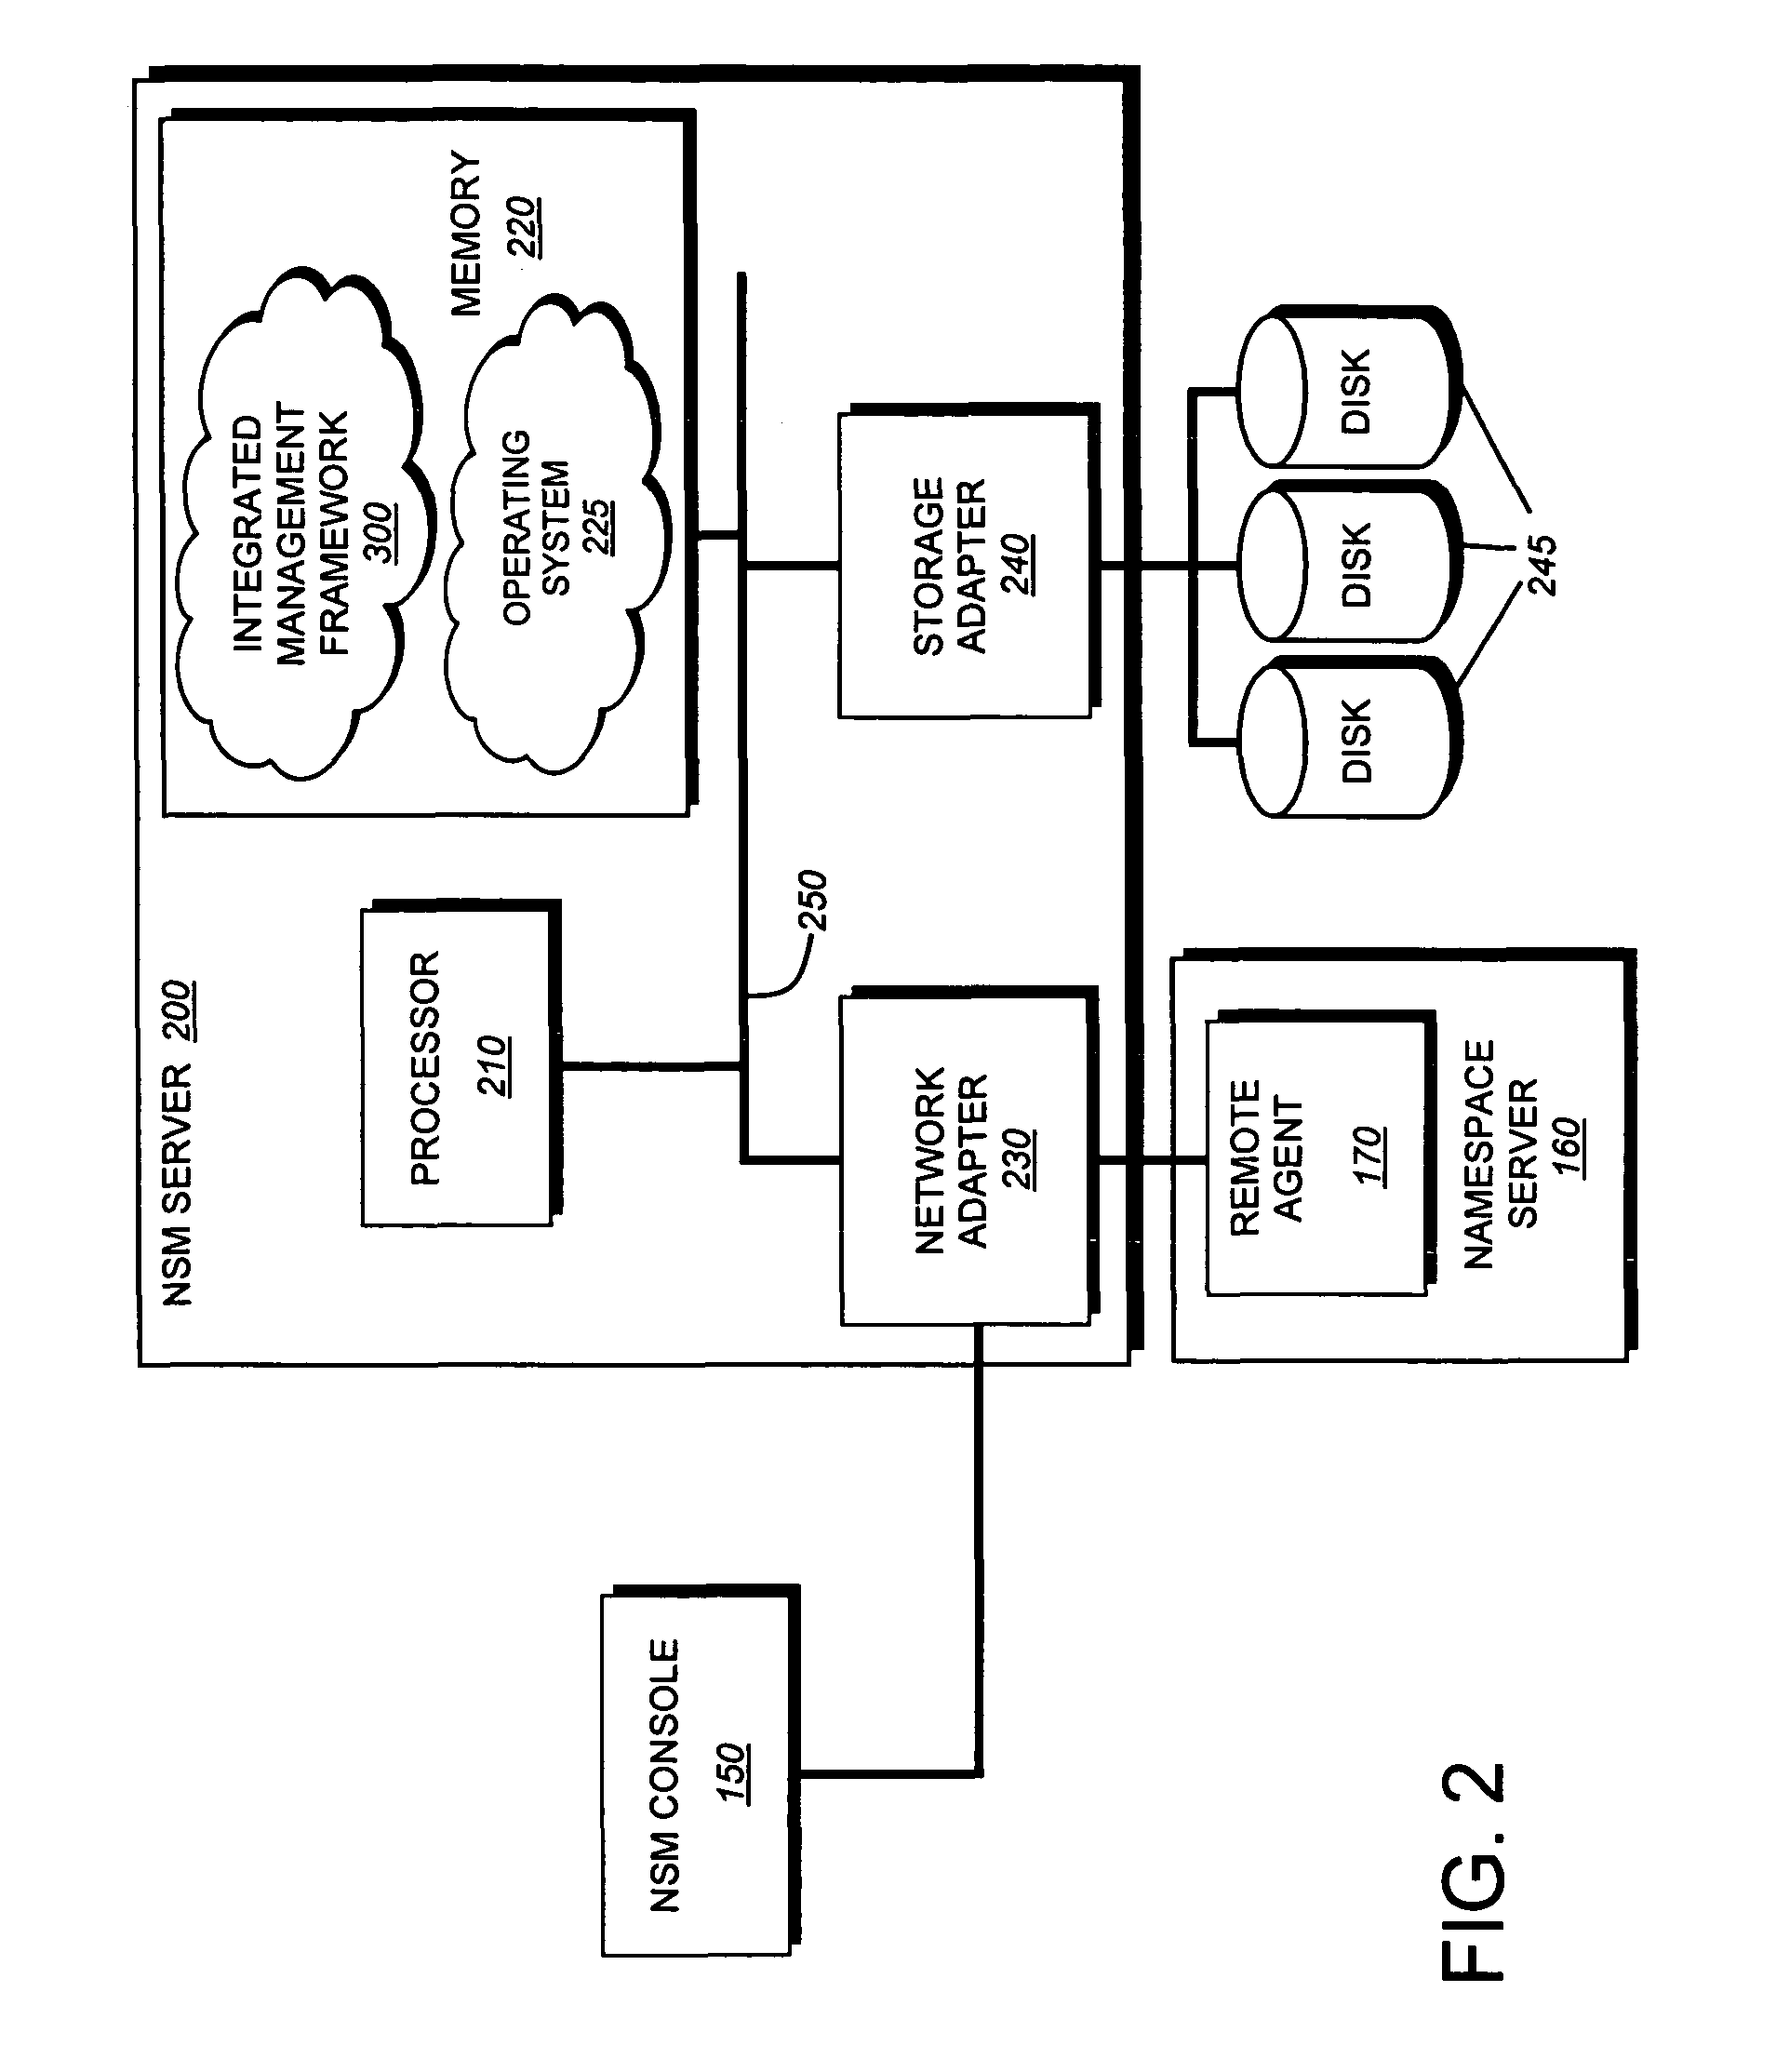 System and method for integrating namespace management and storage management in a storage system environment